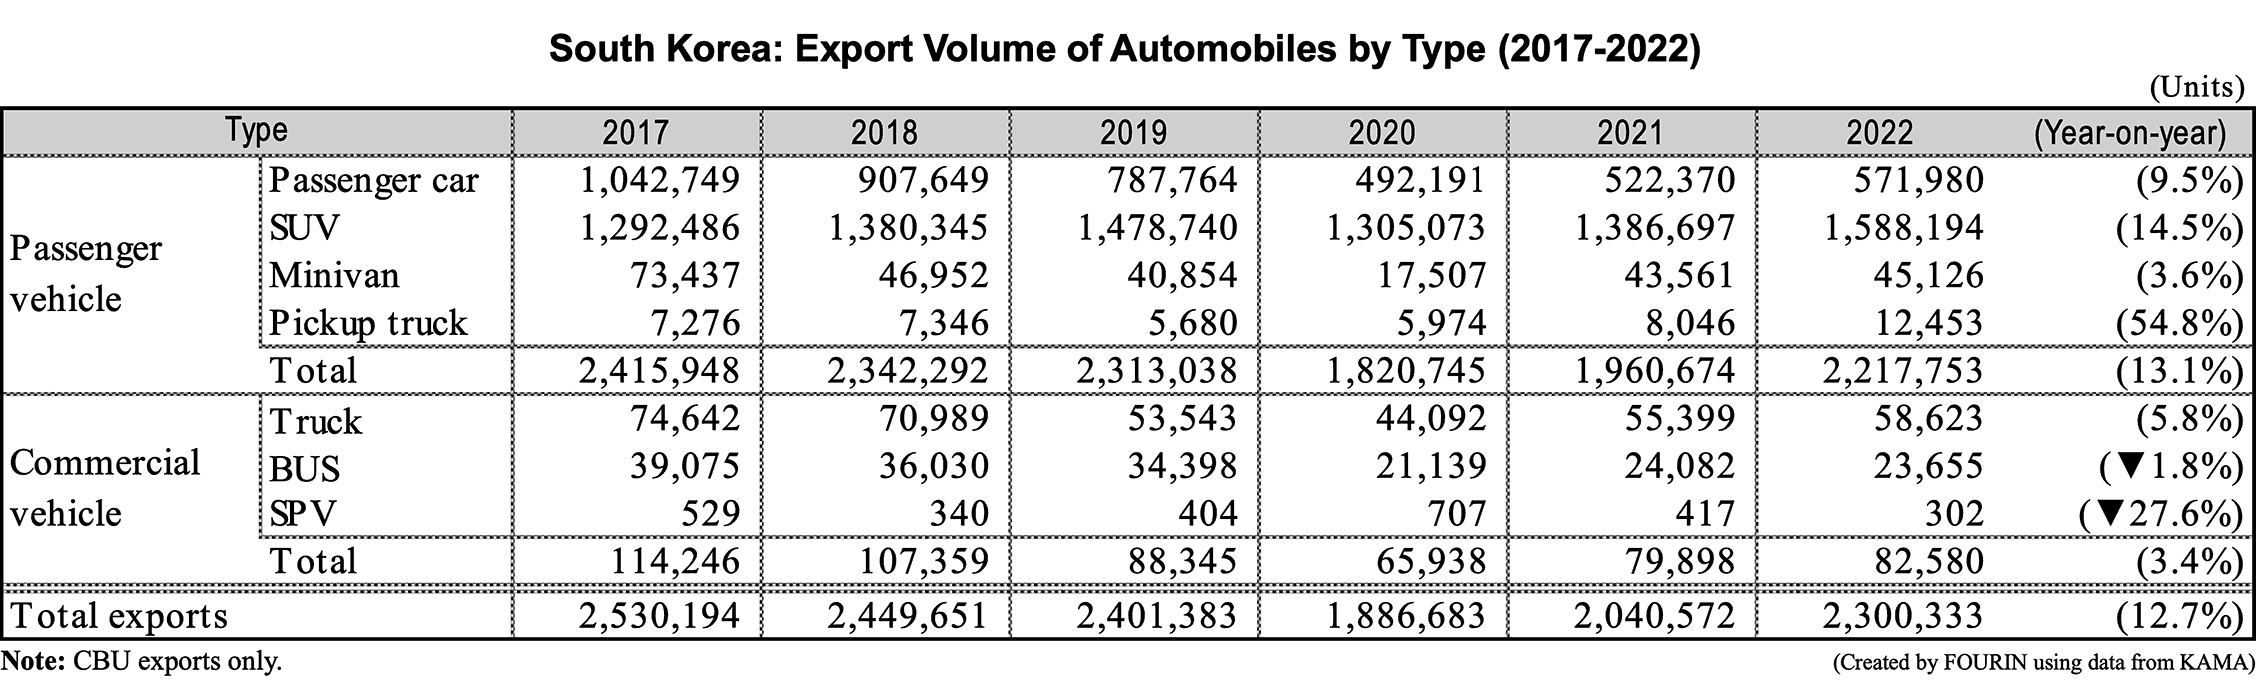 South Korea: Export Volume of Automobiles by Type (2017-2022)